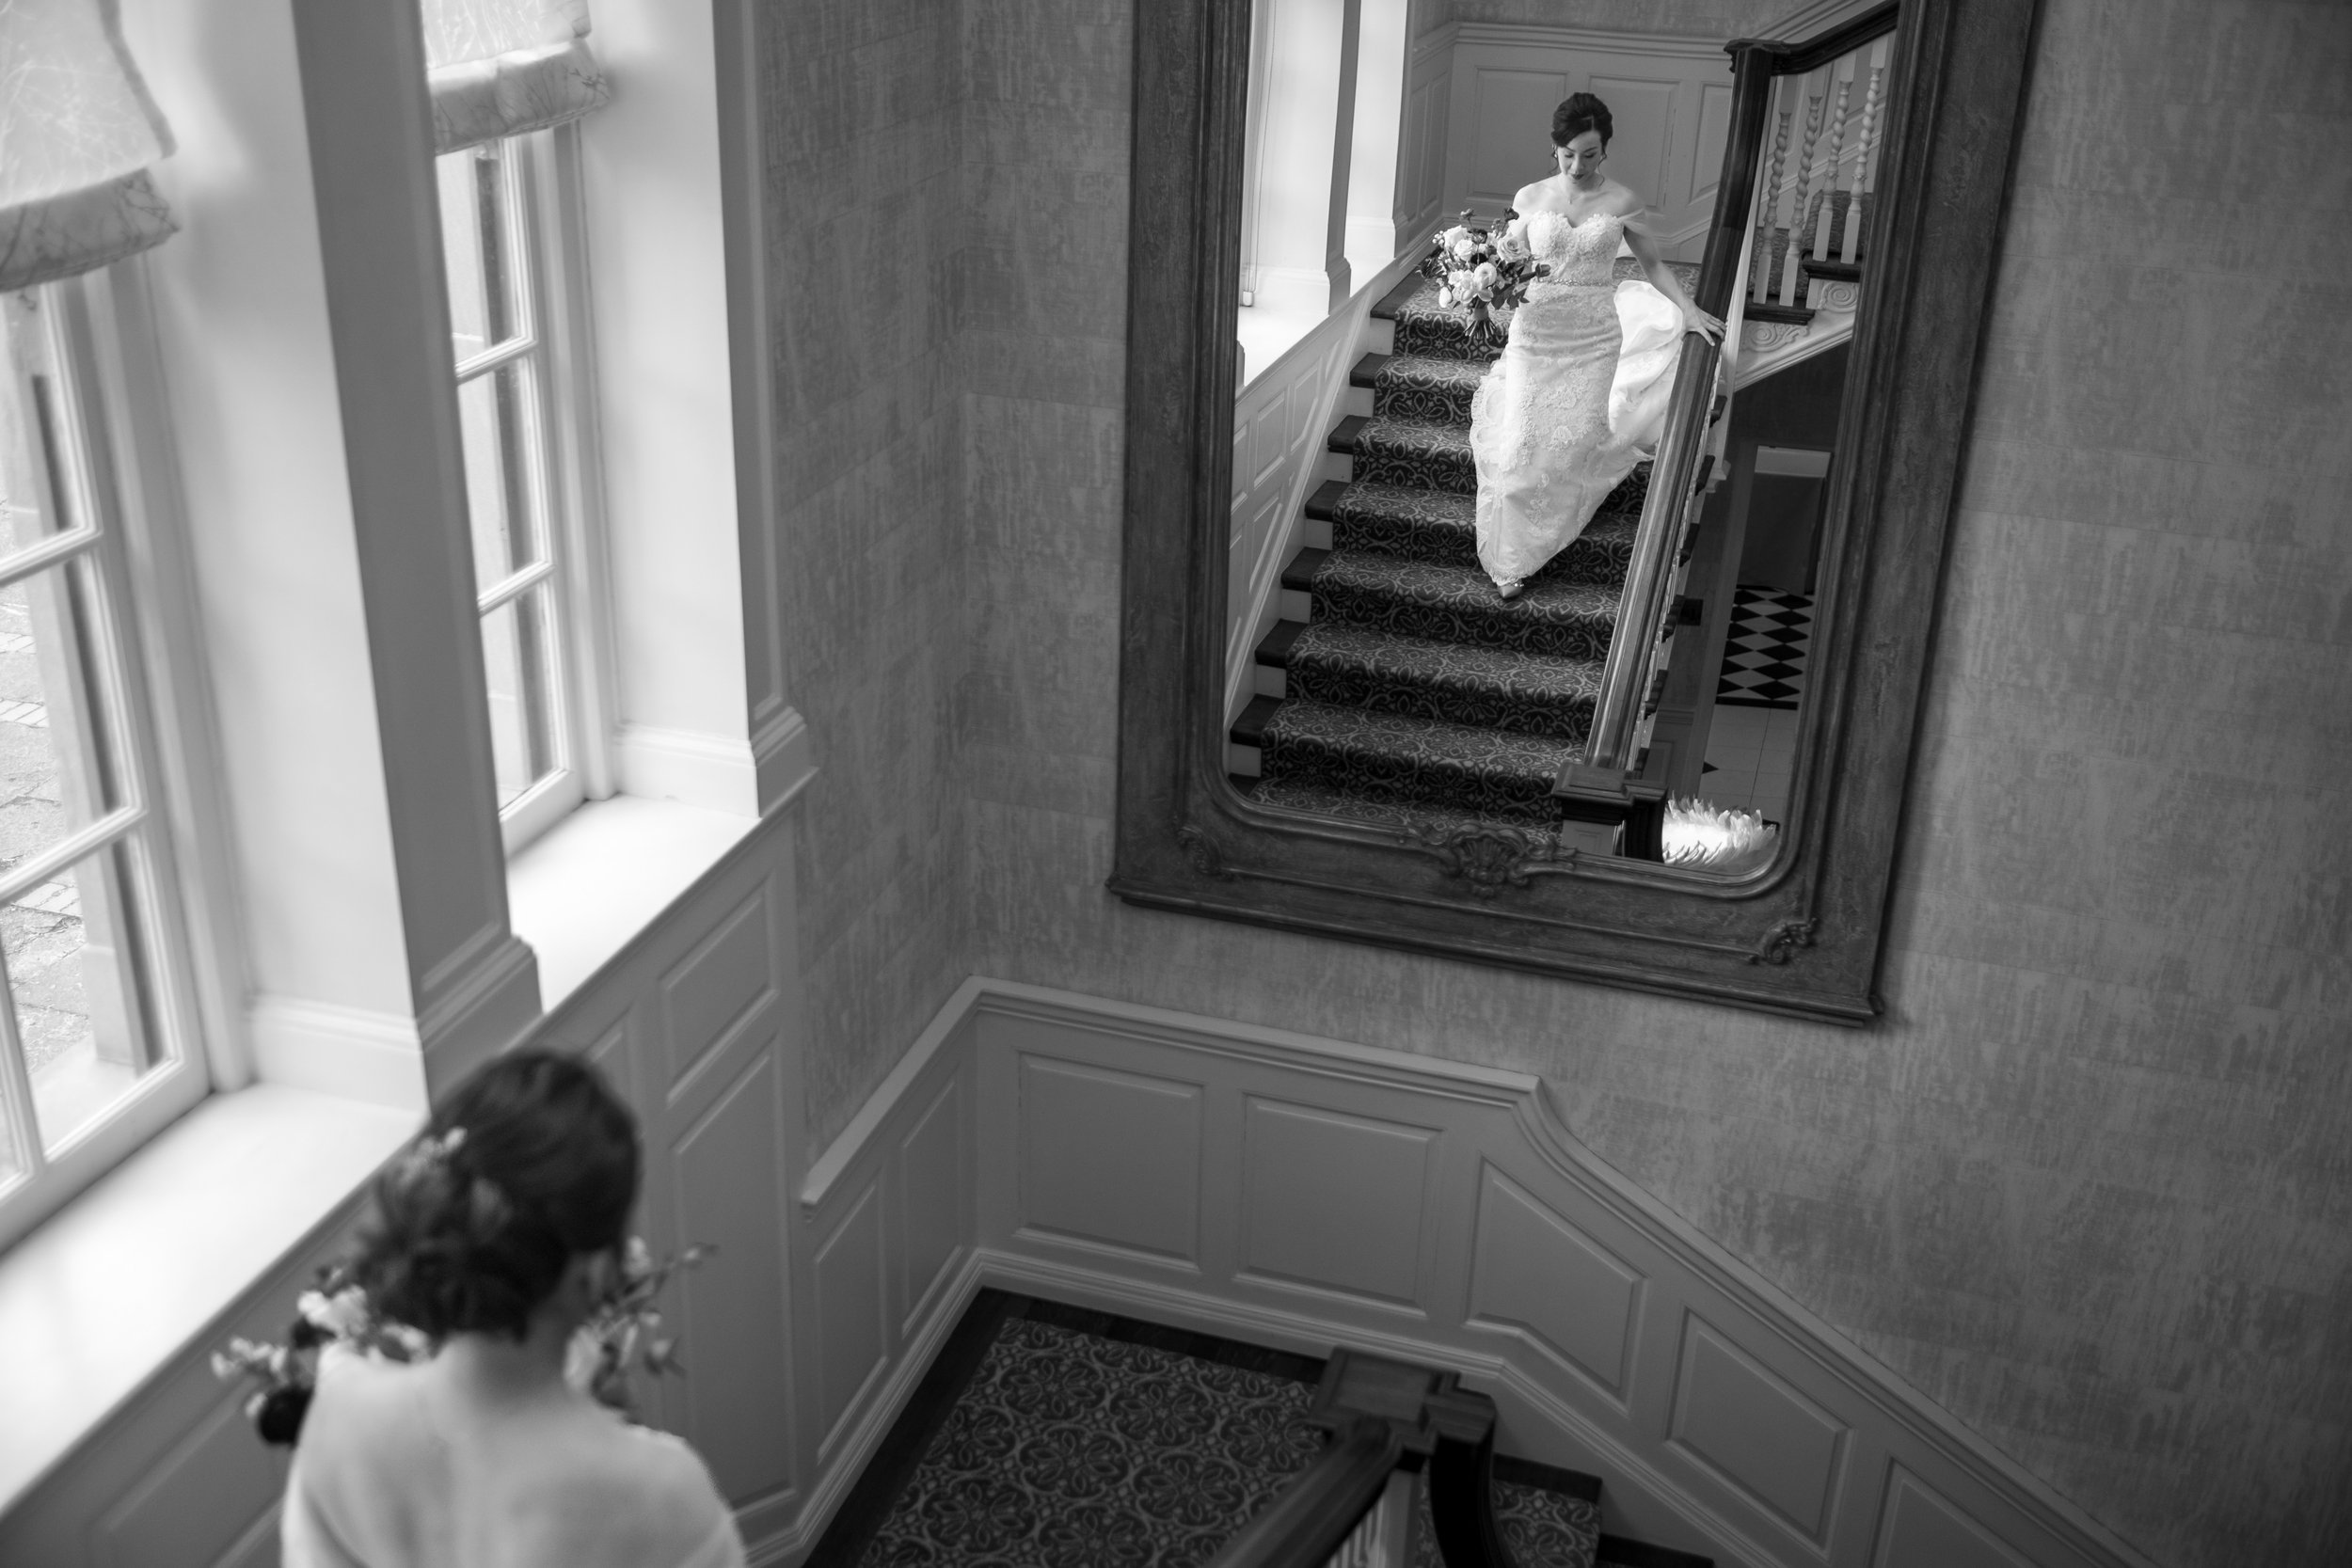  A candid wedding photograph of Jennifer on her way to see Jarvis for their first look  before their wedding later at Graydon Hall in Toronto, Ontario.  Photograph by Toronto Wedding Photographer Scott Williams. (www.scottwilliamsphotographer.com) 